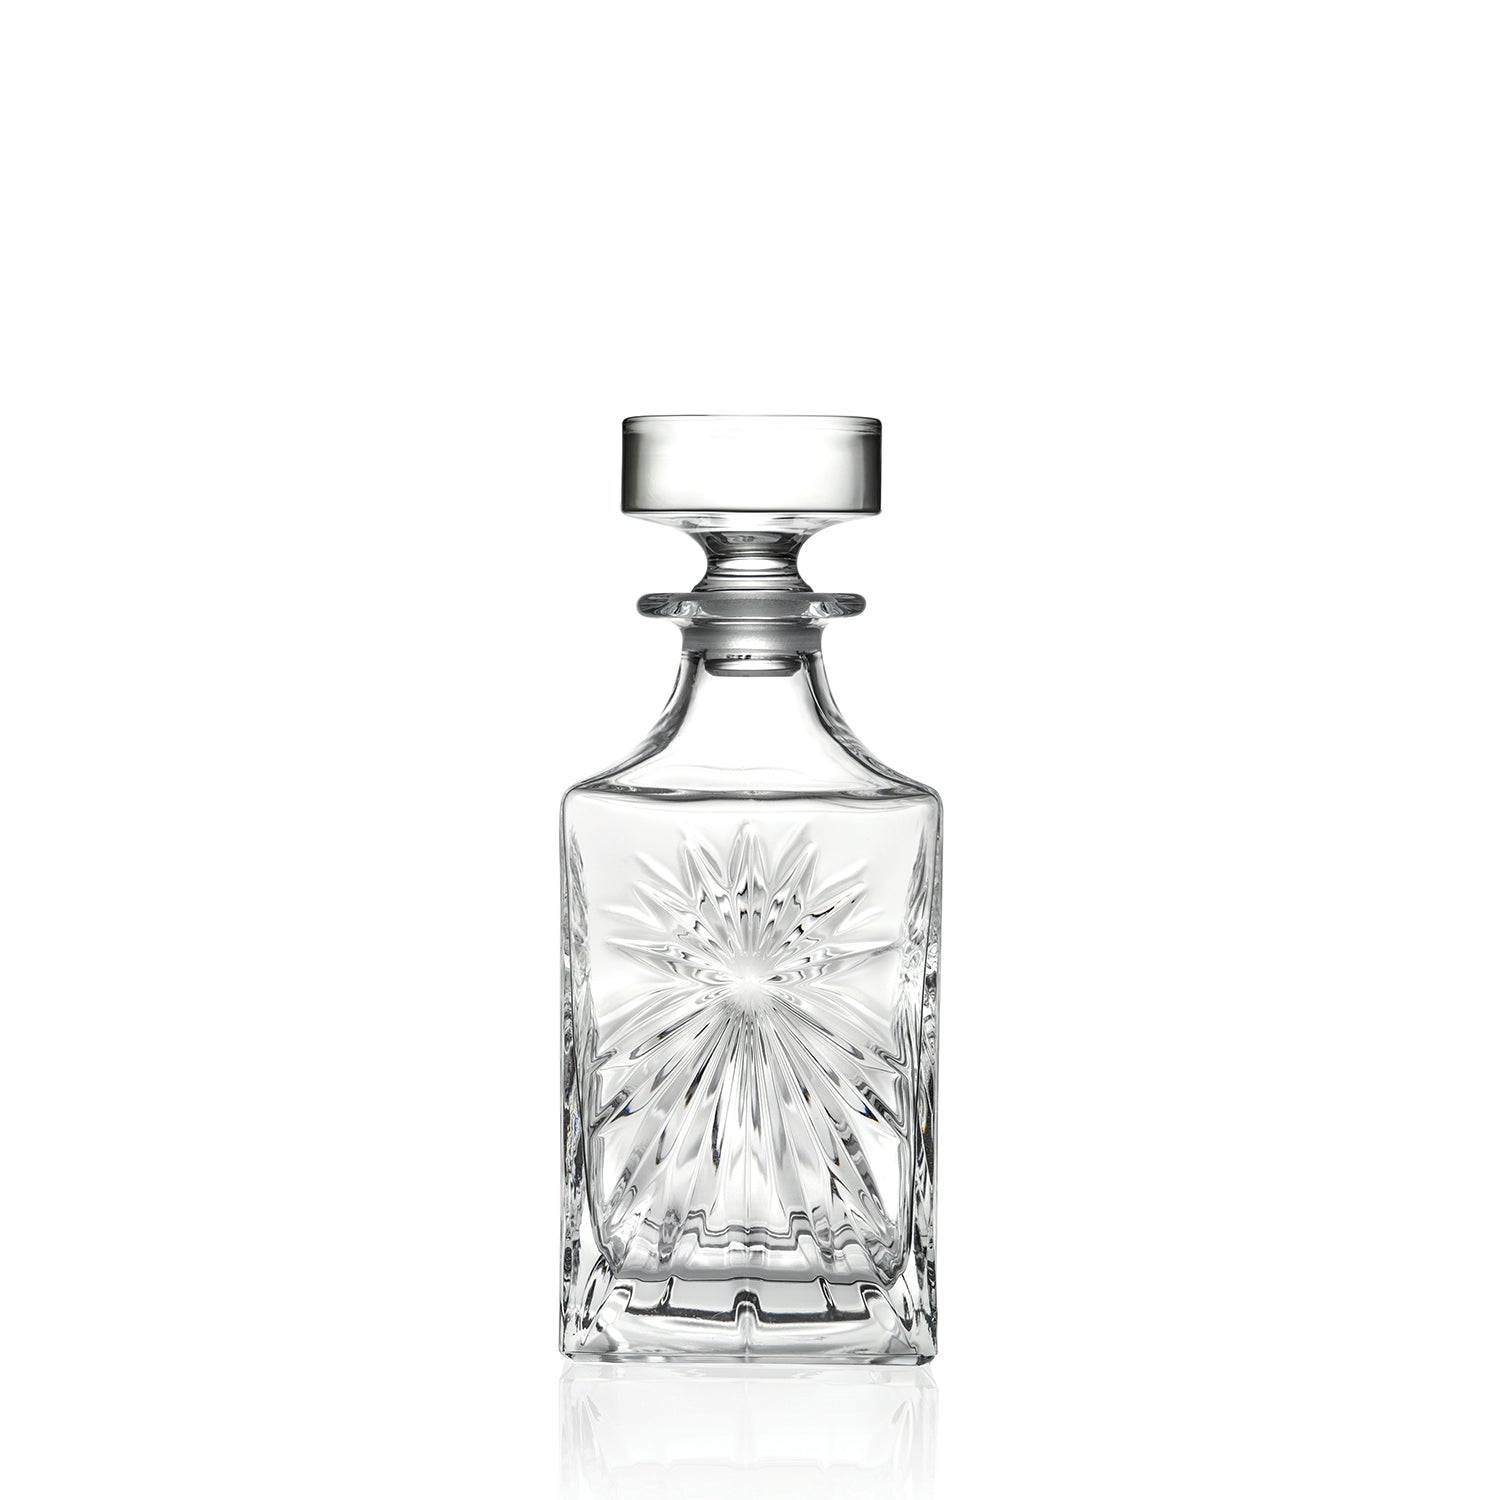 RCR(Made In Italy) Oasis Crystal Whisky Decanter 850 ML